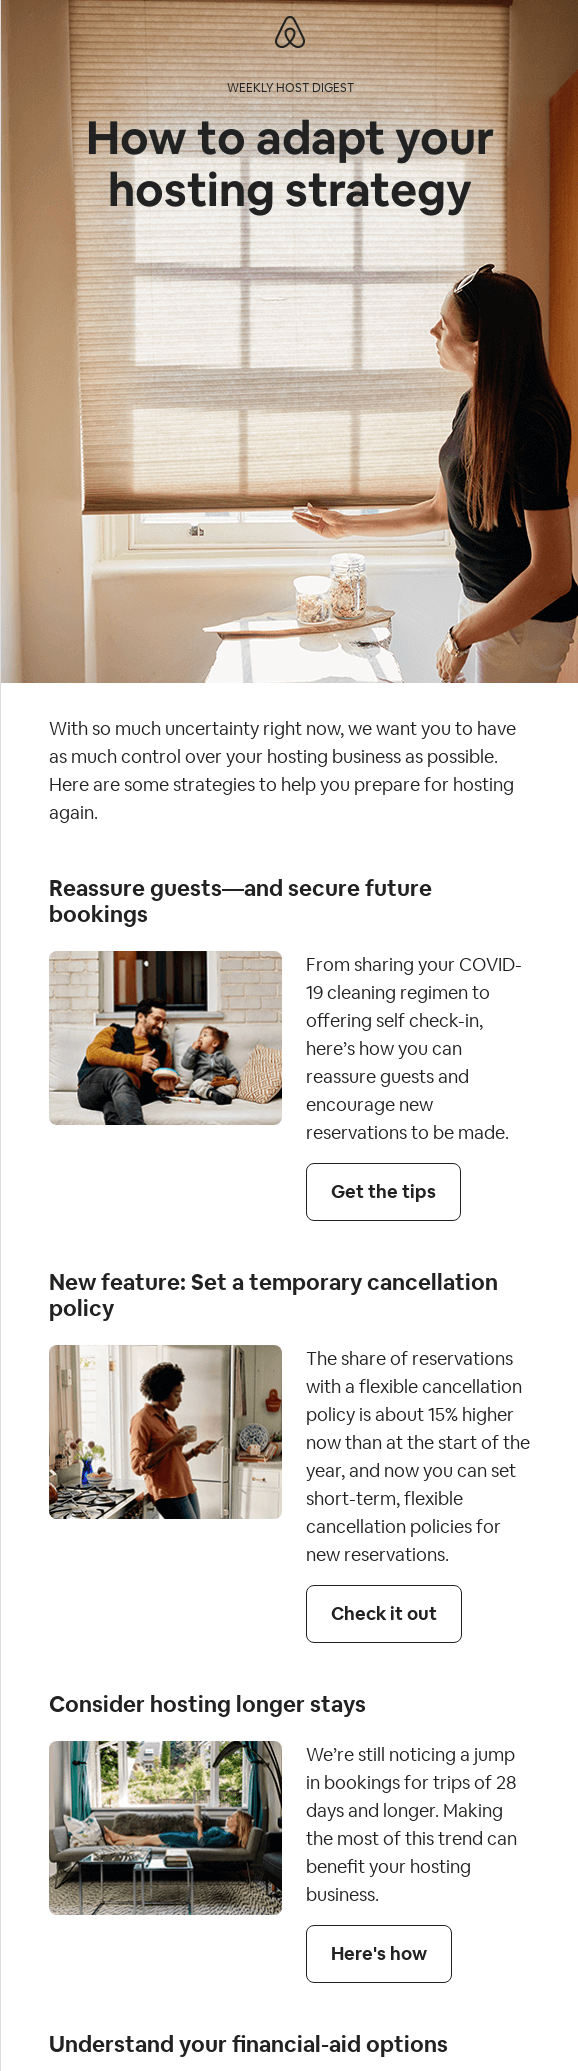 Airbnb Email - How to adapt your hosting strategy